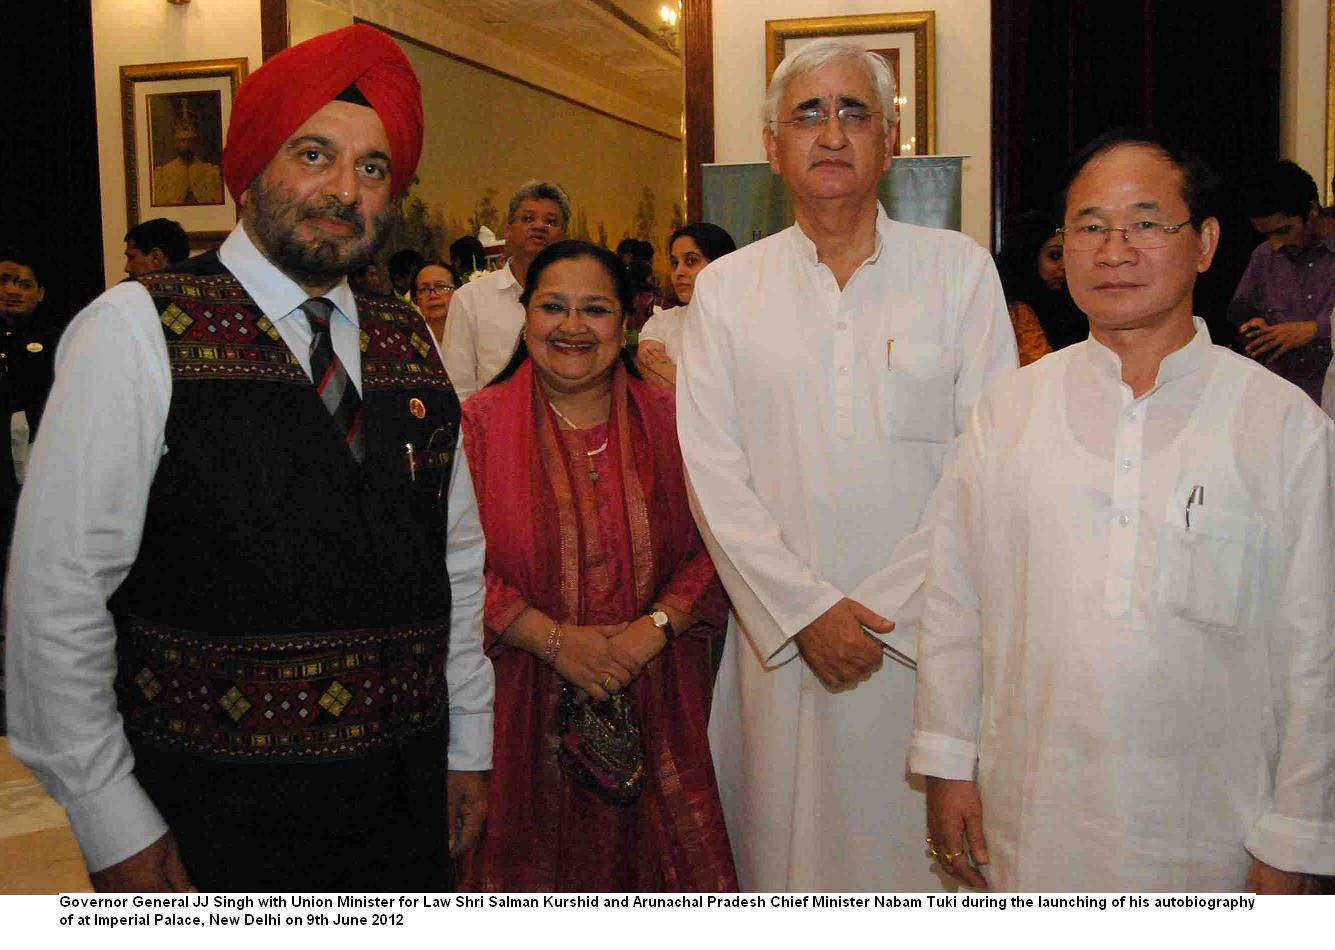 General Joginder Jaswant Singh With Politician